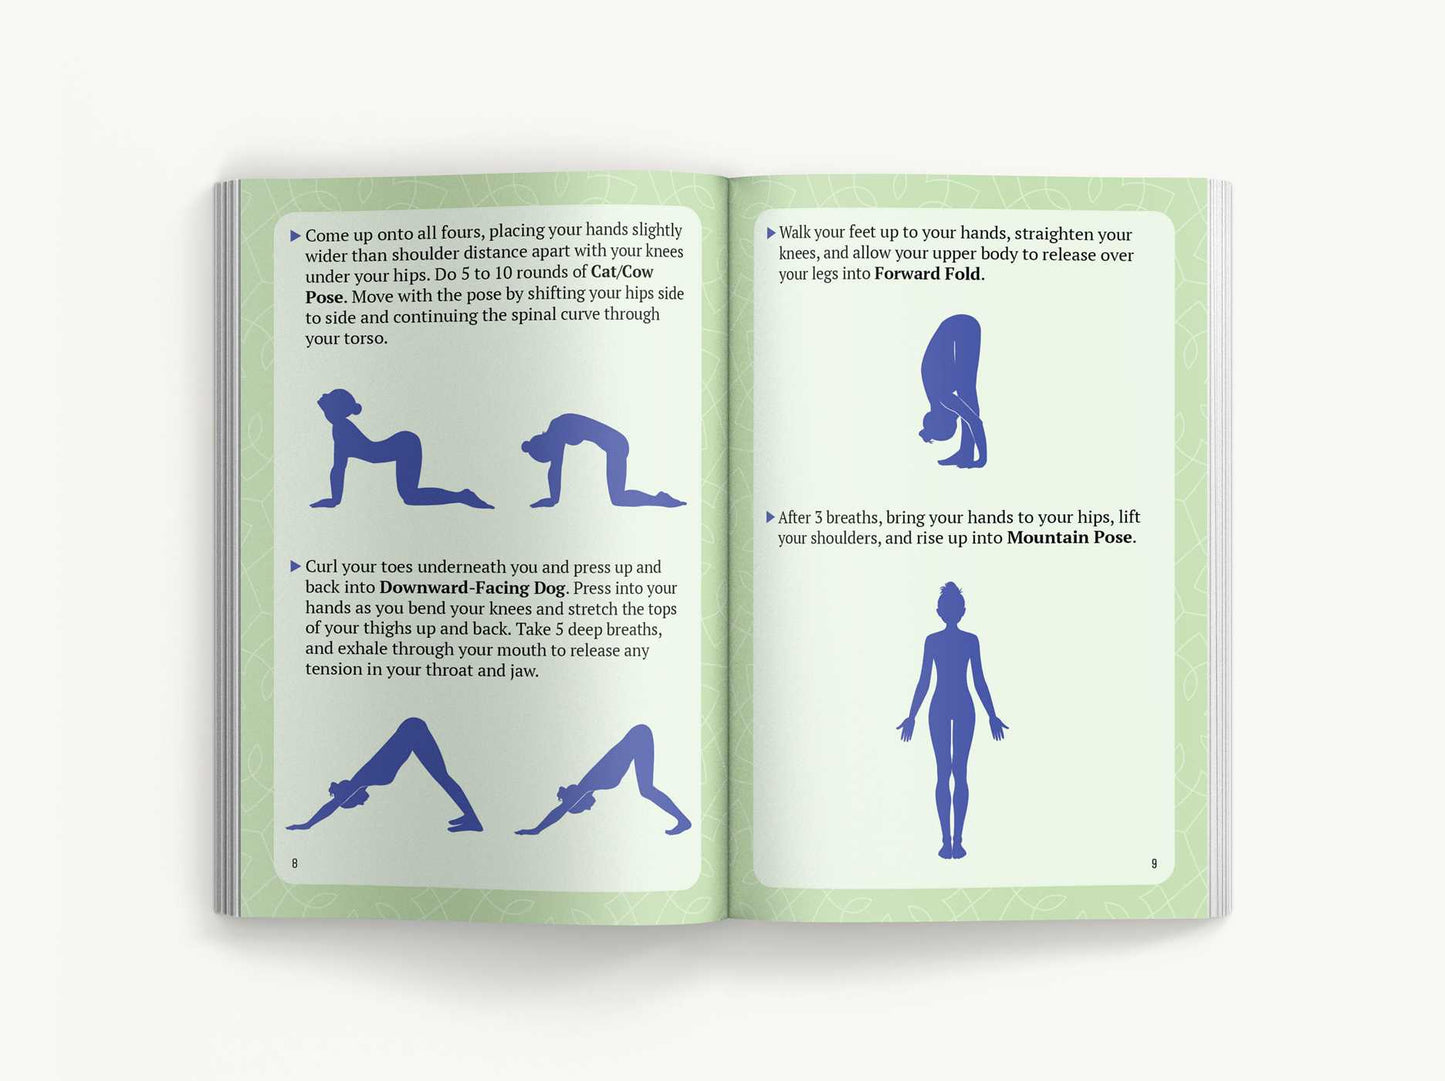 Yoga Cards: 60 Yoga Cards For Balance and Relaxation Anywhere, Anytime